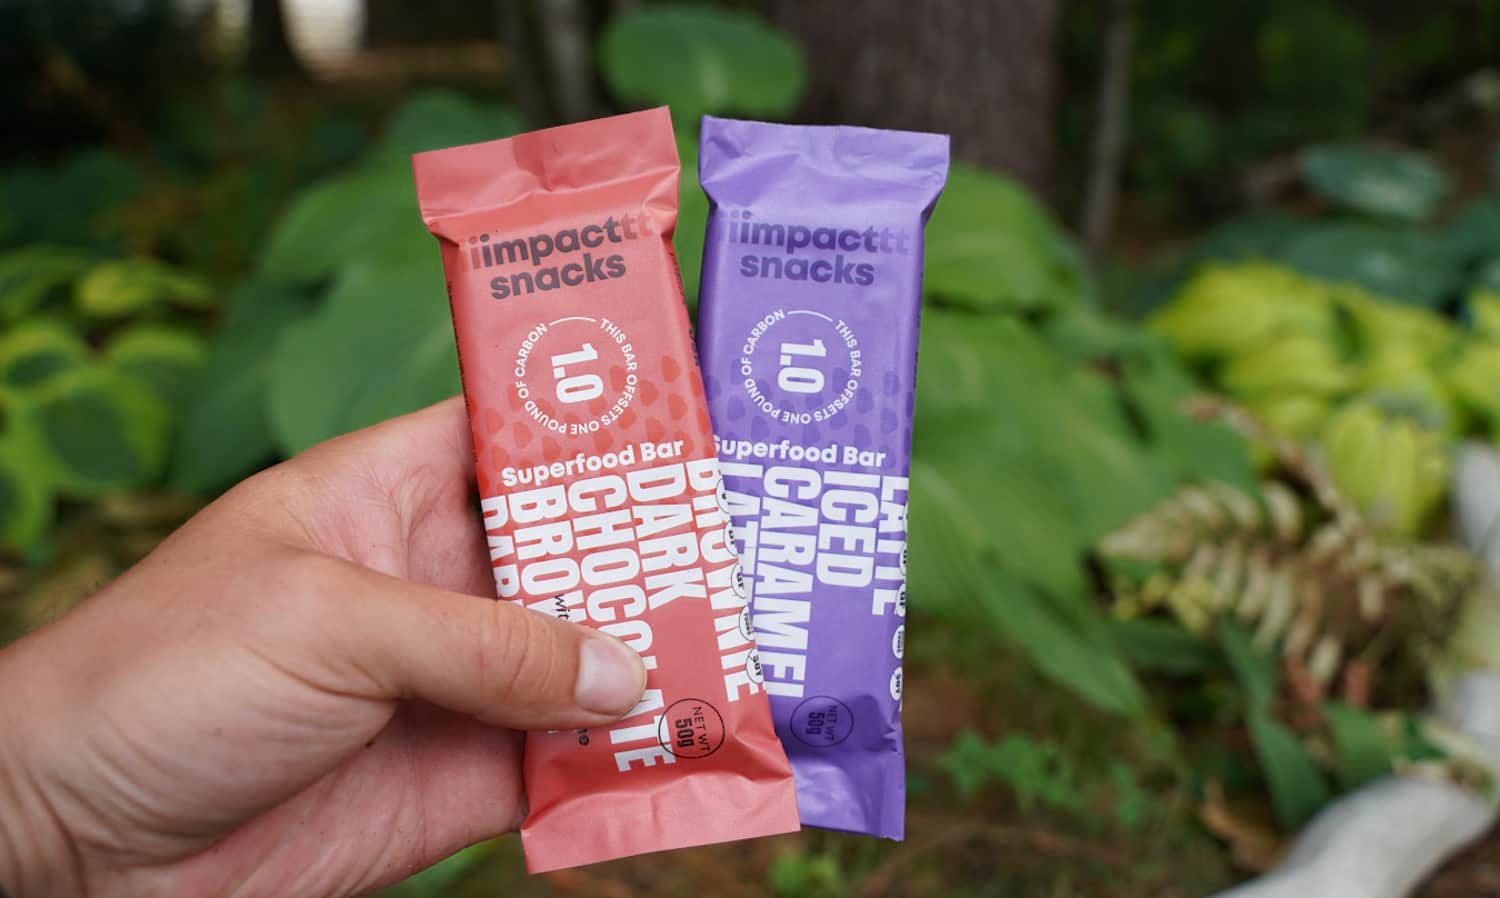 Impacts Snacks is a plant-based superfood bar company that uses compostable wrappers and reclaims more carbon that it uses to make its bars.